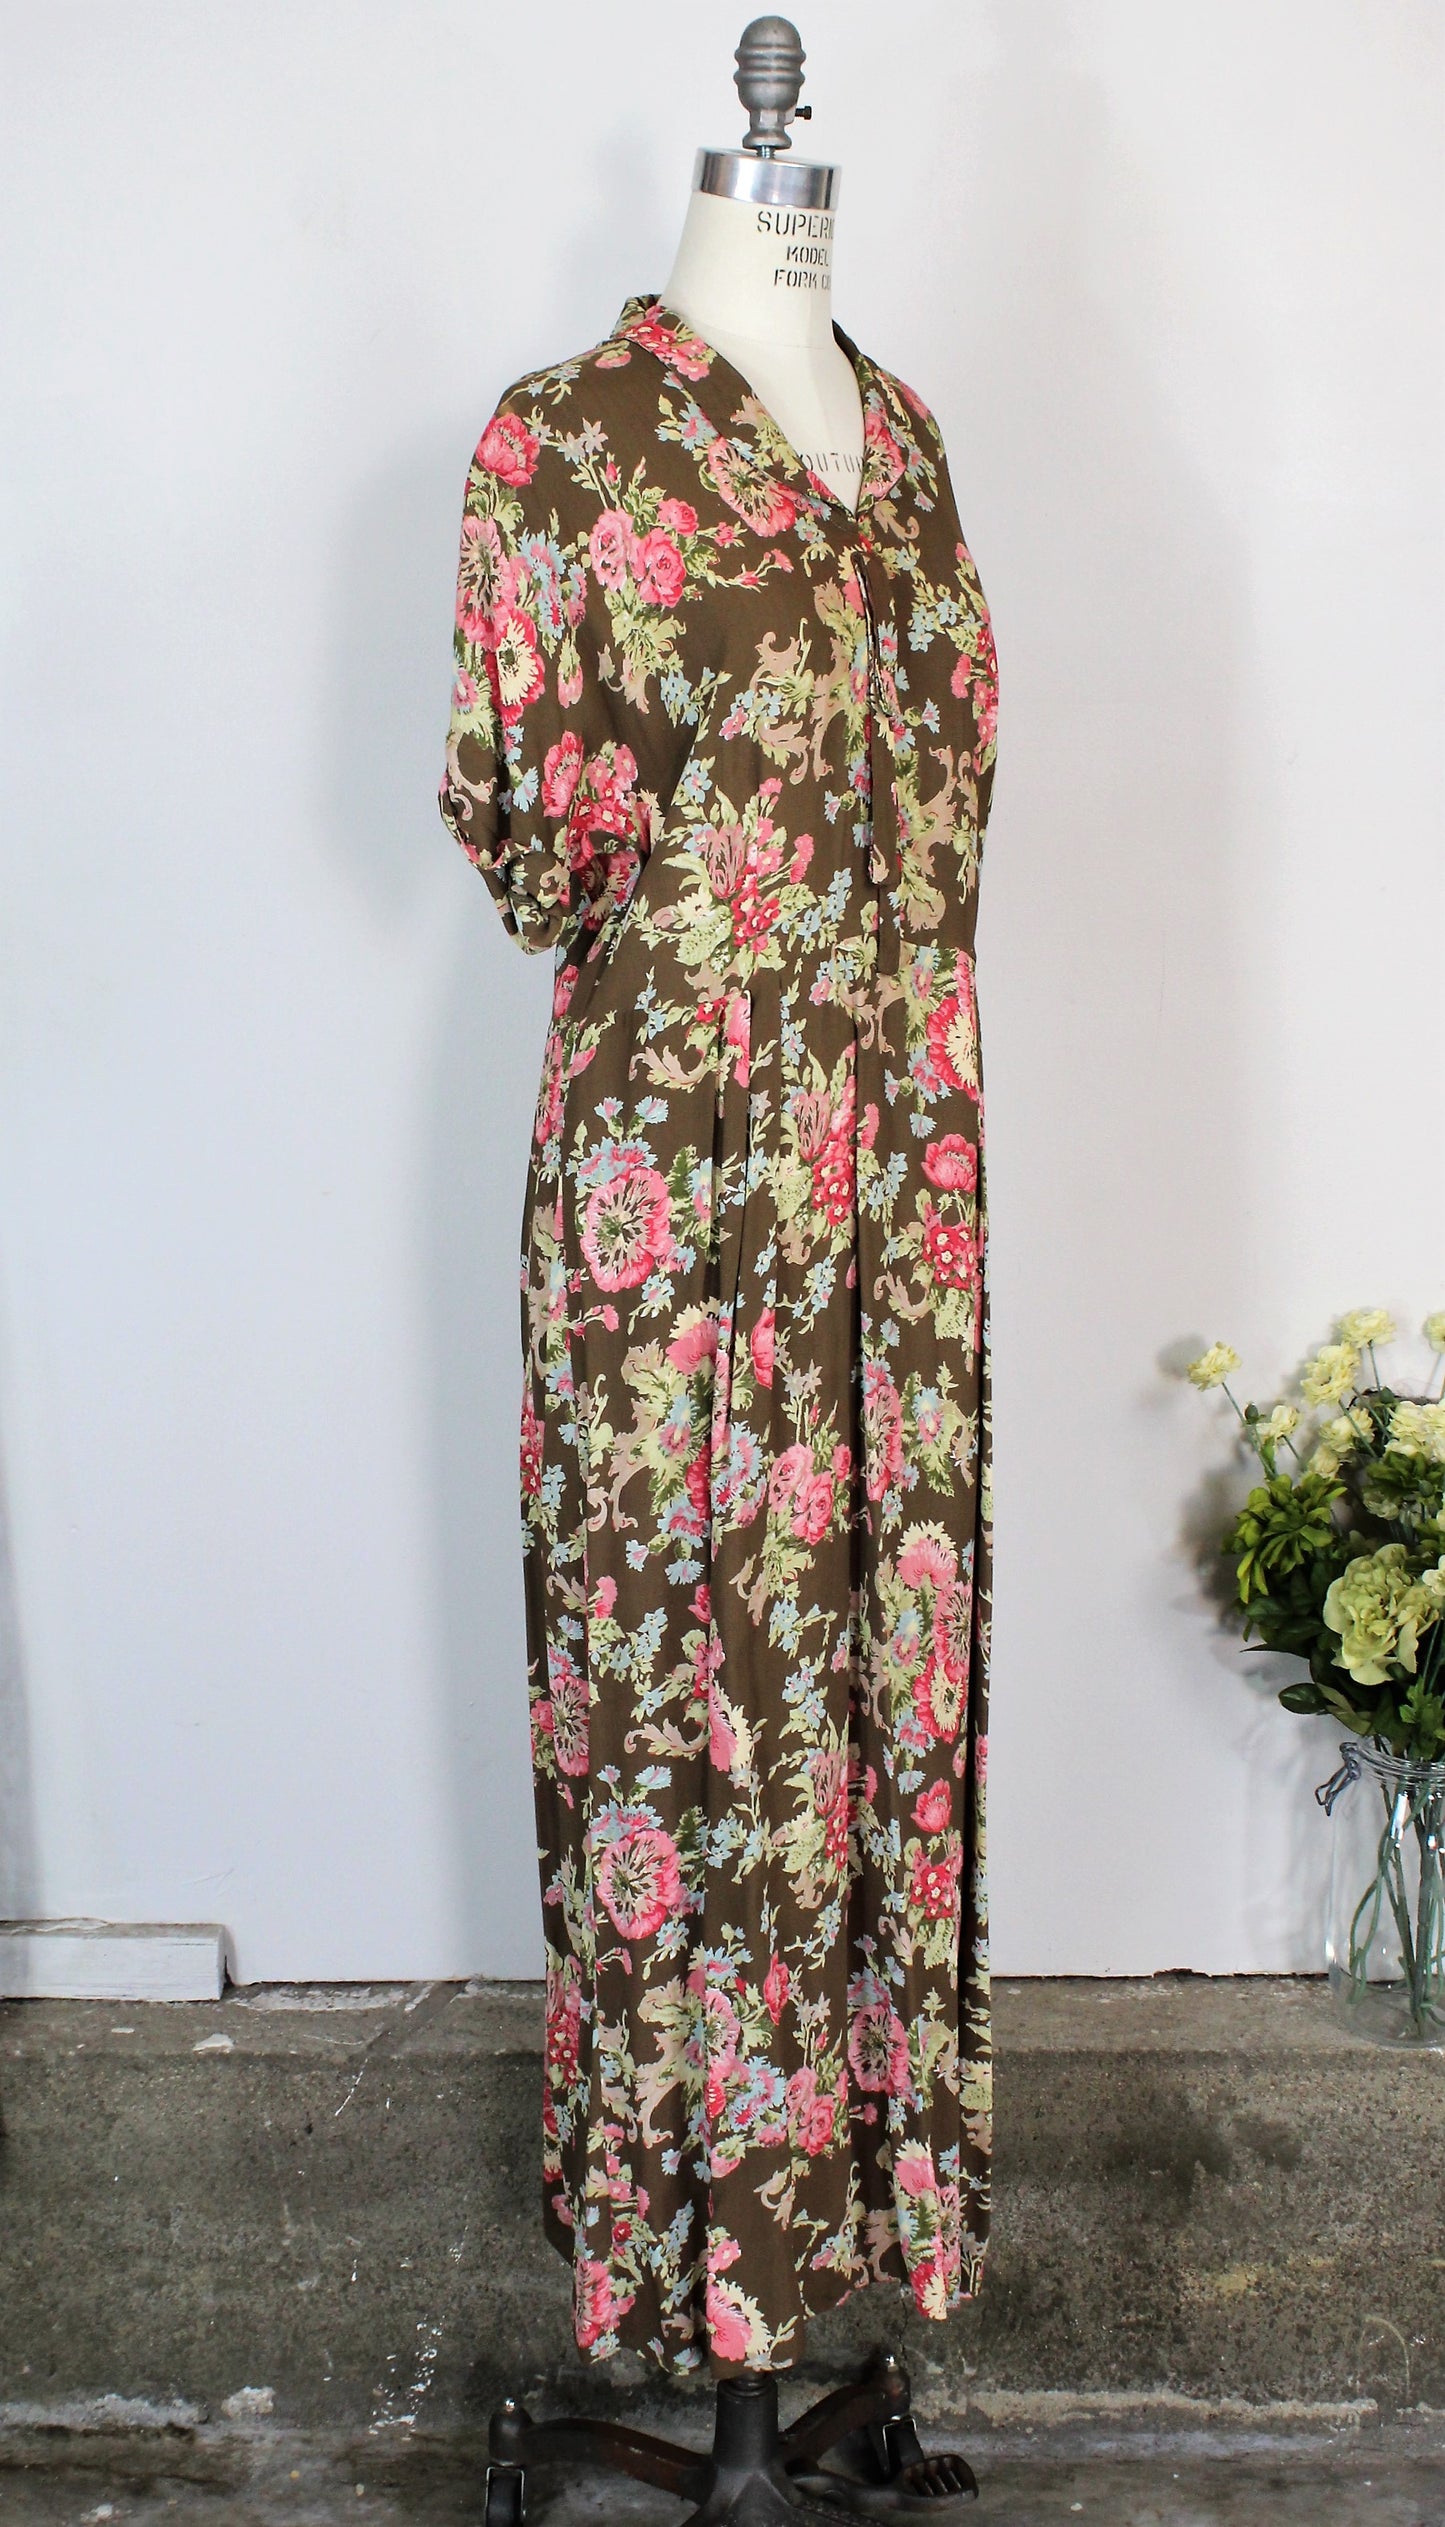 Vintage 1980s Does 1940s Floral Print Rayon Dress